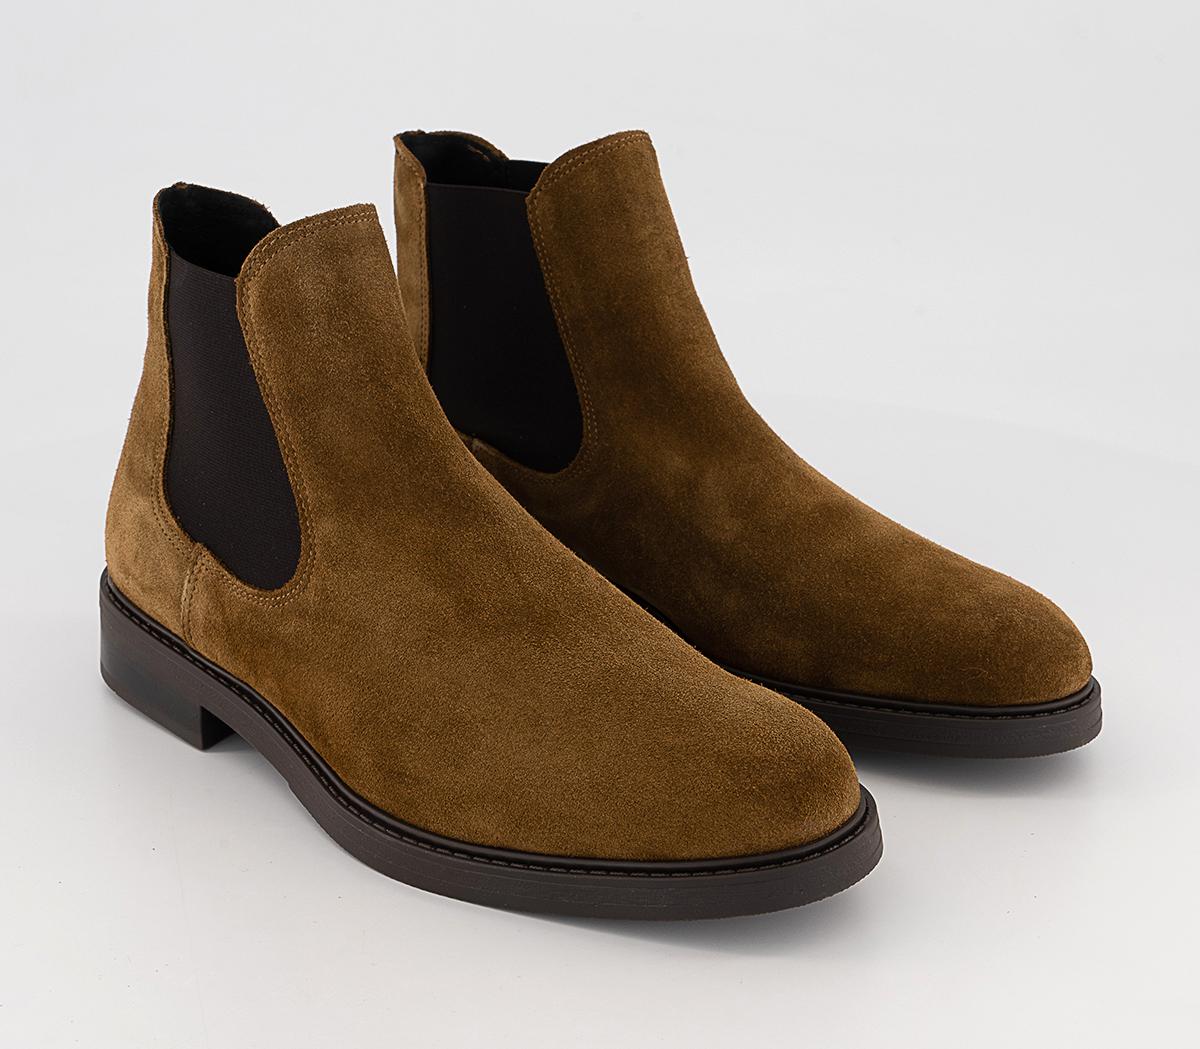 Selected Homme Mens Blake Chelsea Boots Tobacco Brown, 11